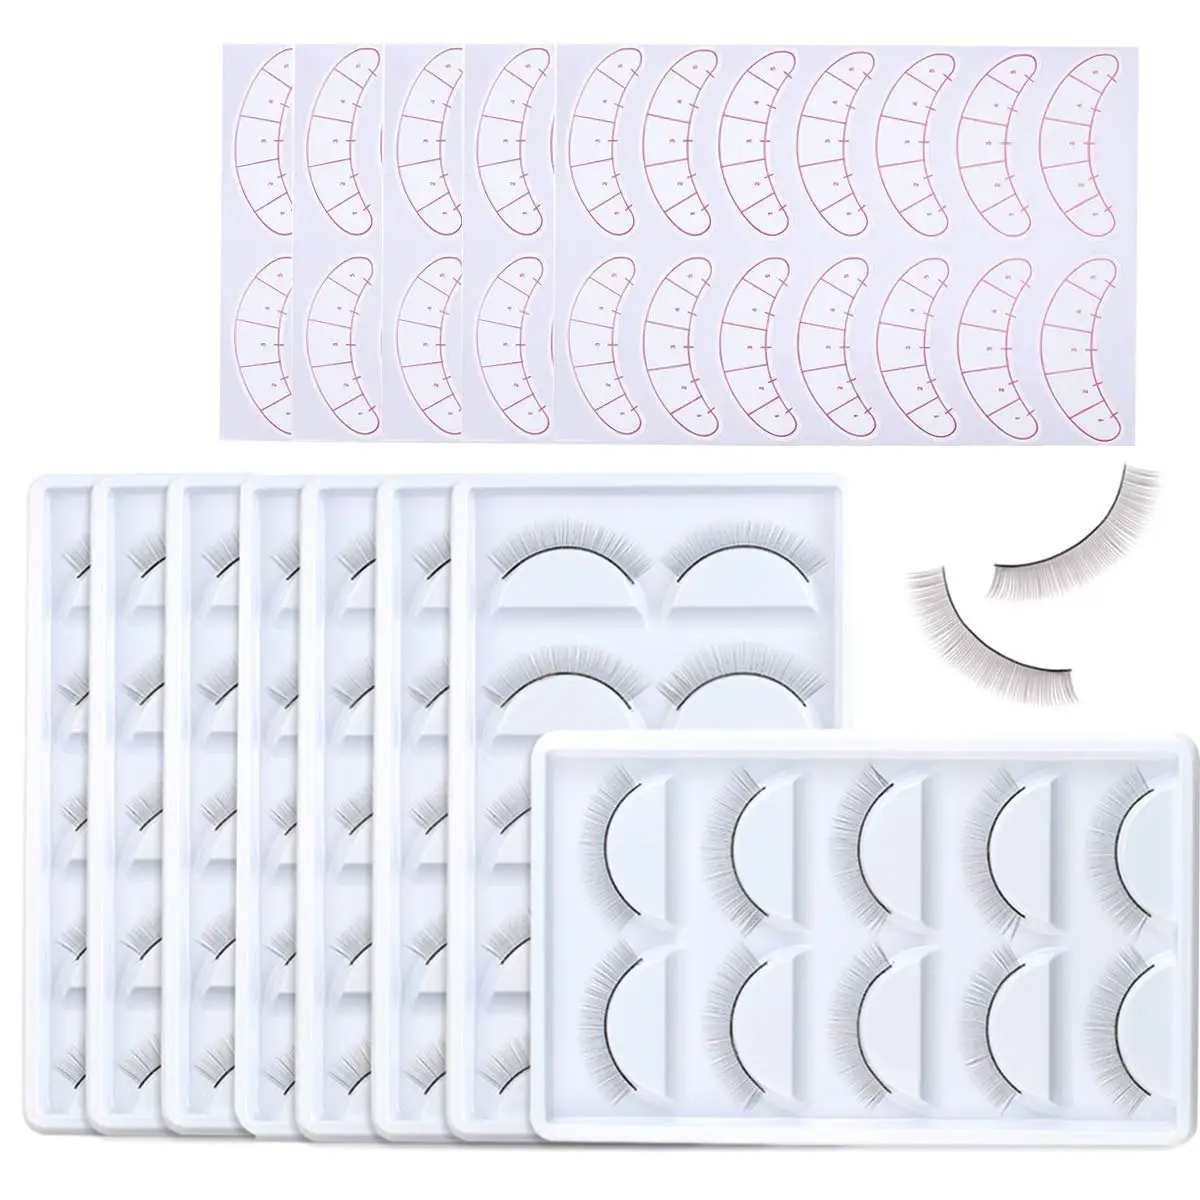 Practice Eyelash Extension Supplies Self Adhesive Training Natural Lashes Strips Eyelashes Patches Eye Tips Sticker for Beginer